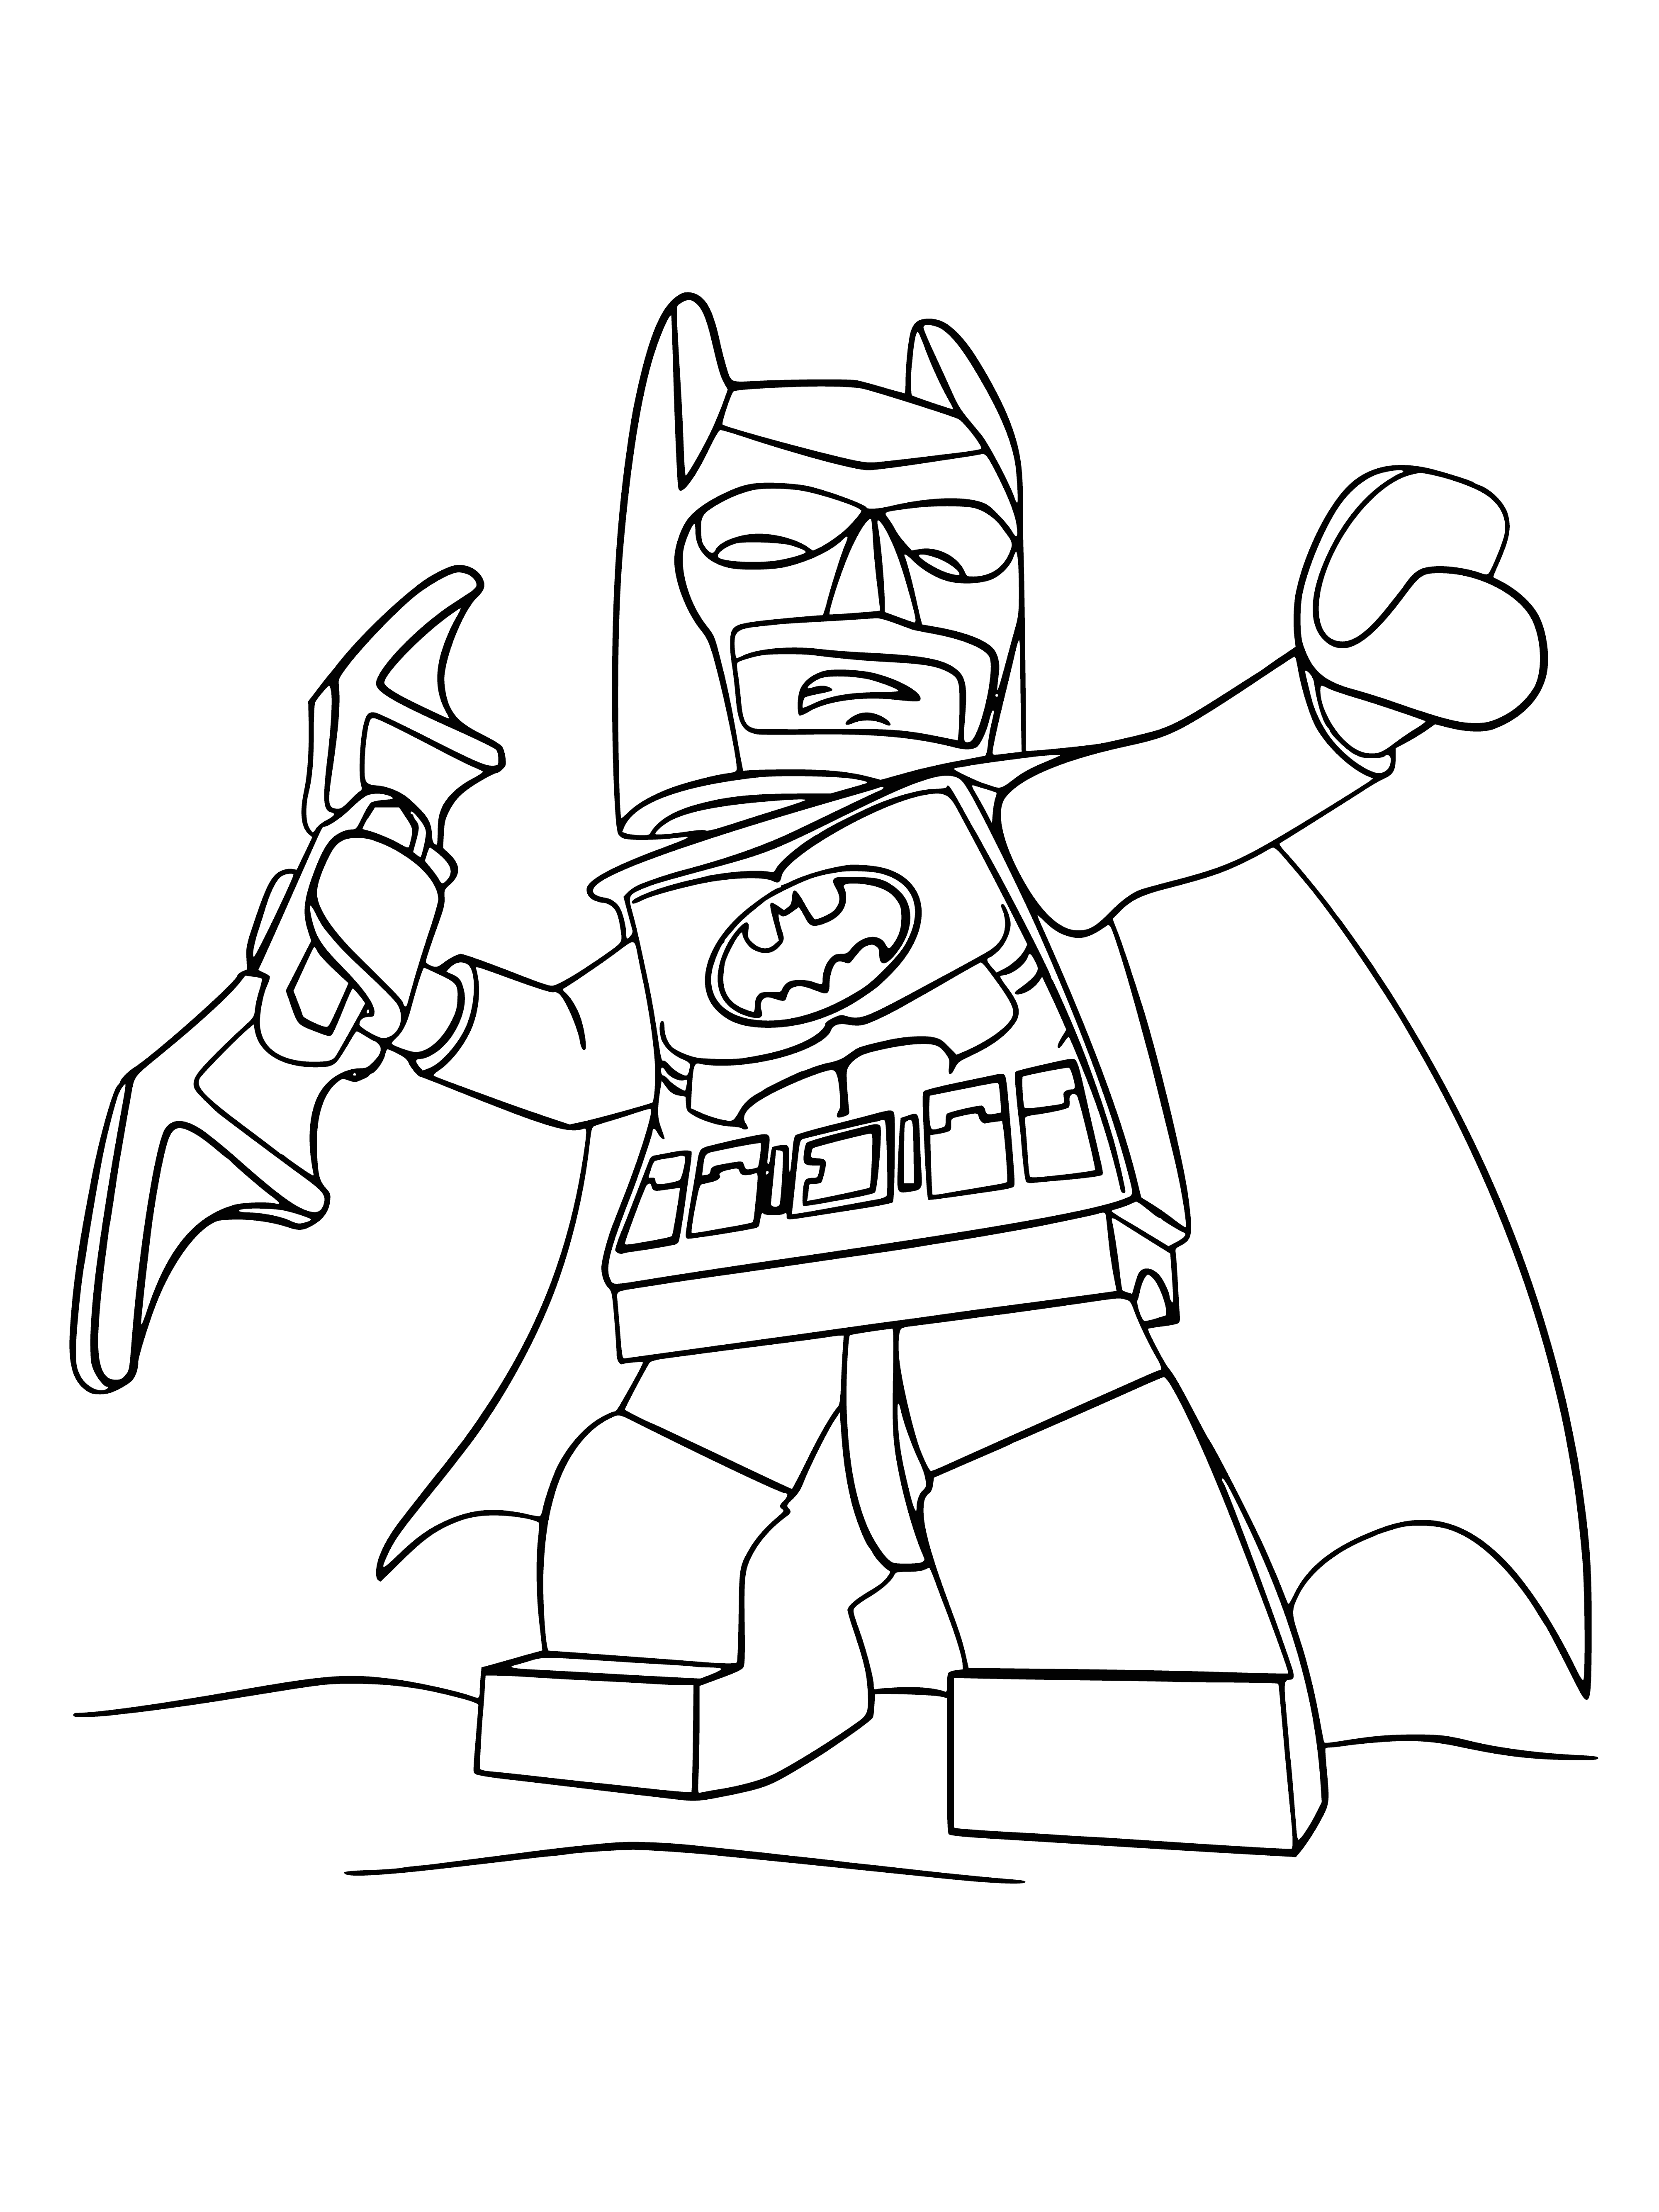 coloring page: LEGO Batman is a super-hero dressed in dark grey & black with yellow symbol, holding a batarang ready to bring justice!